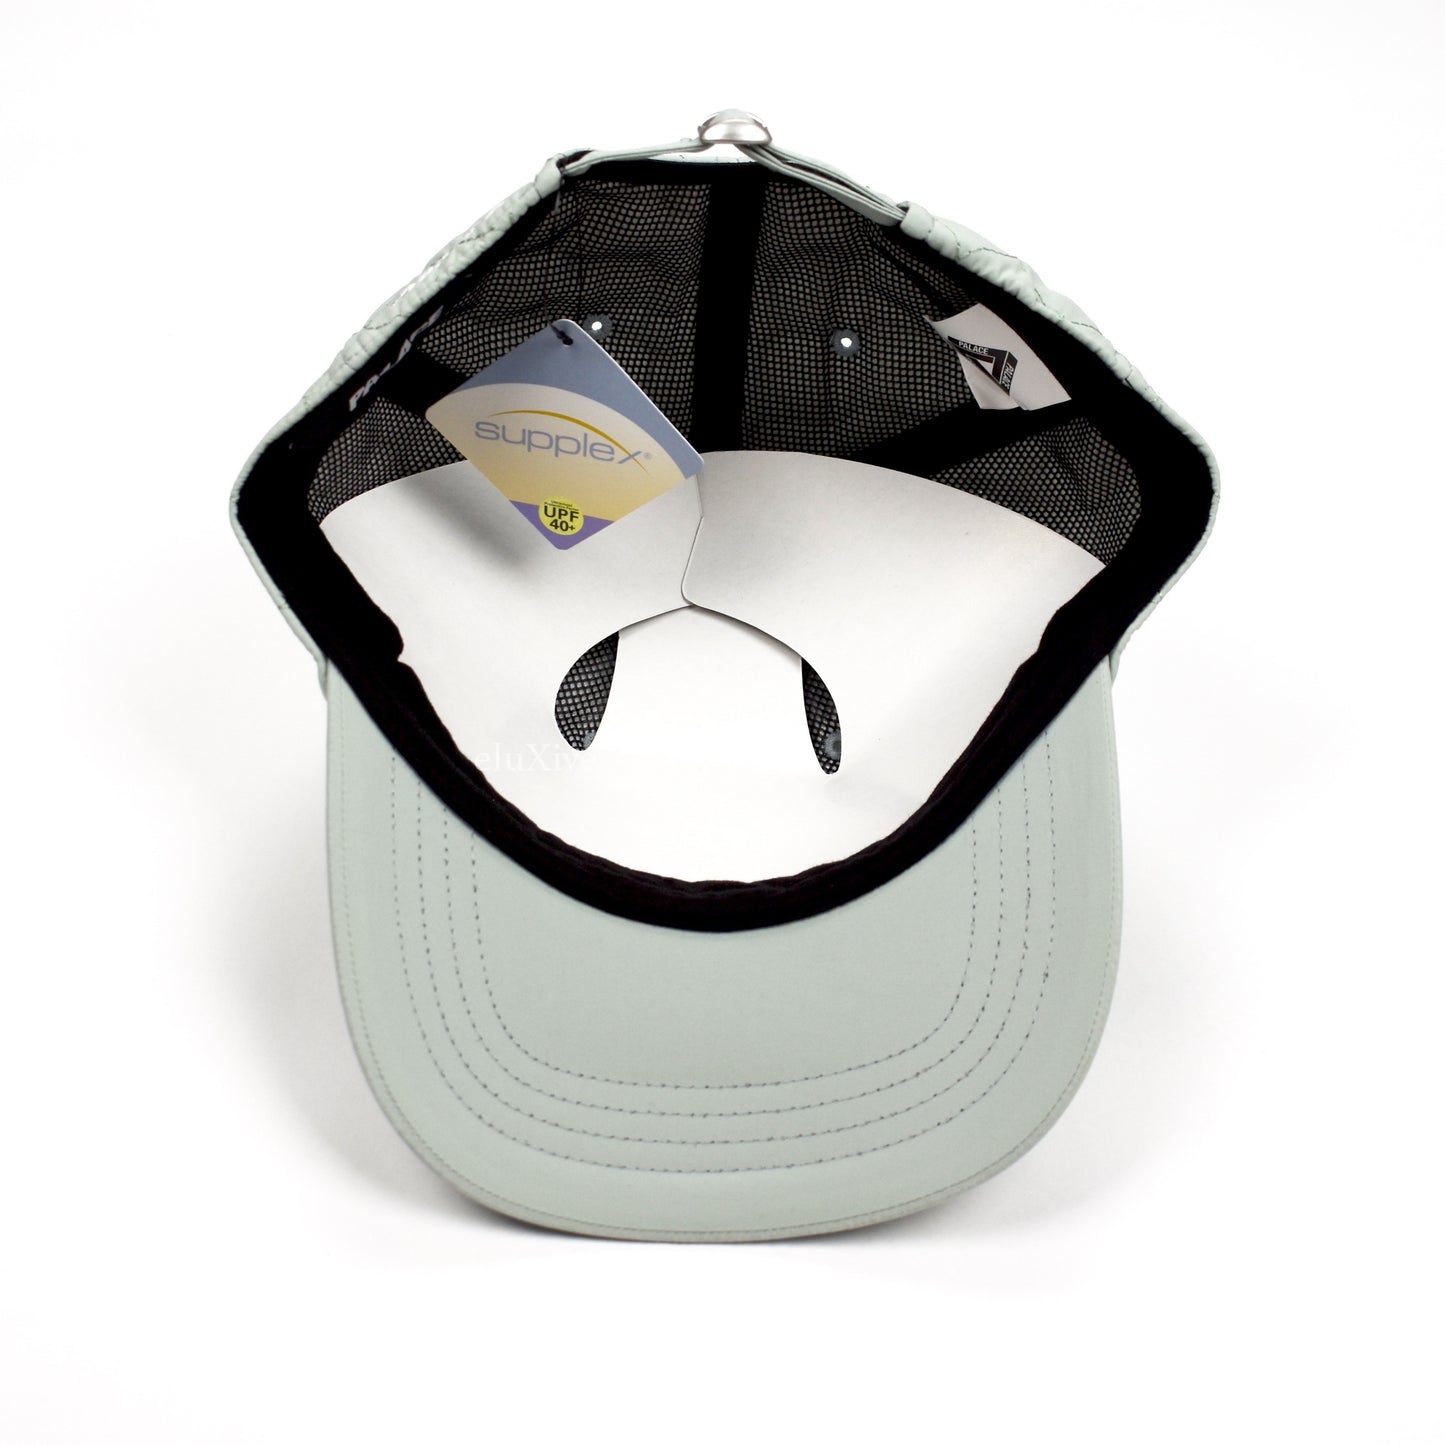 Palace - Warm Dome Shell Quilted P-Logo Hat (Eggshell)